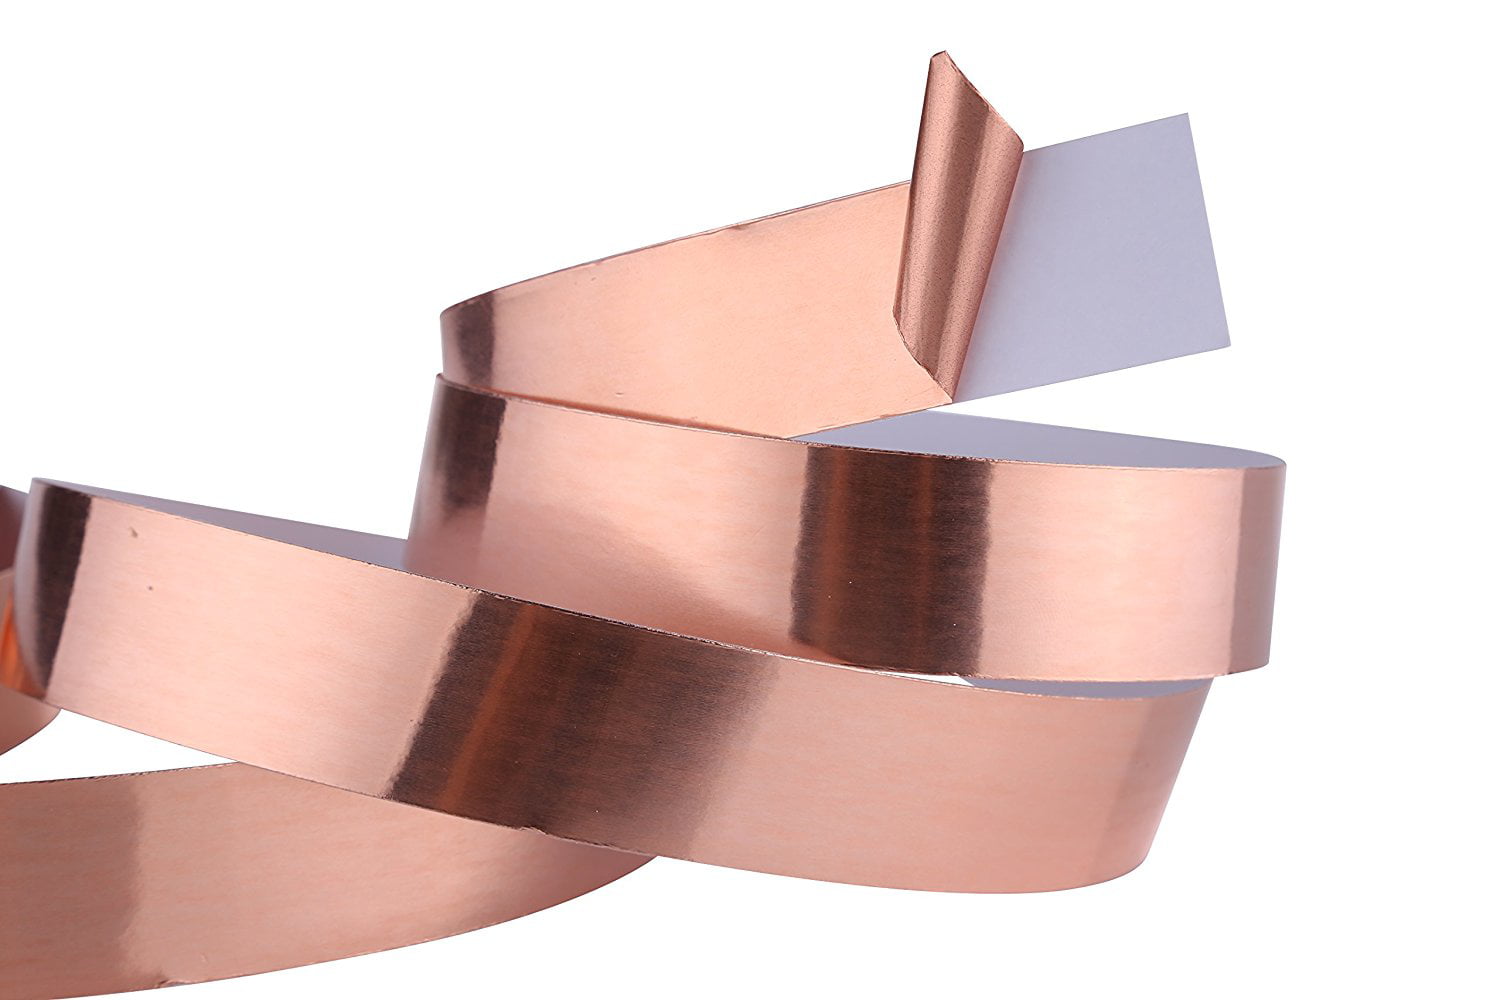 heddier electronic Onlineshop - Self-adhesive Copper Foil